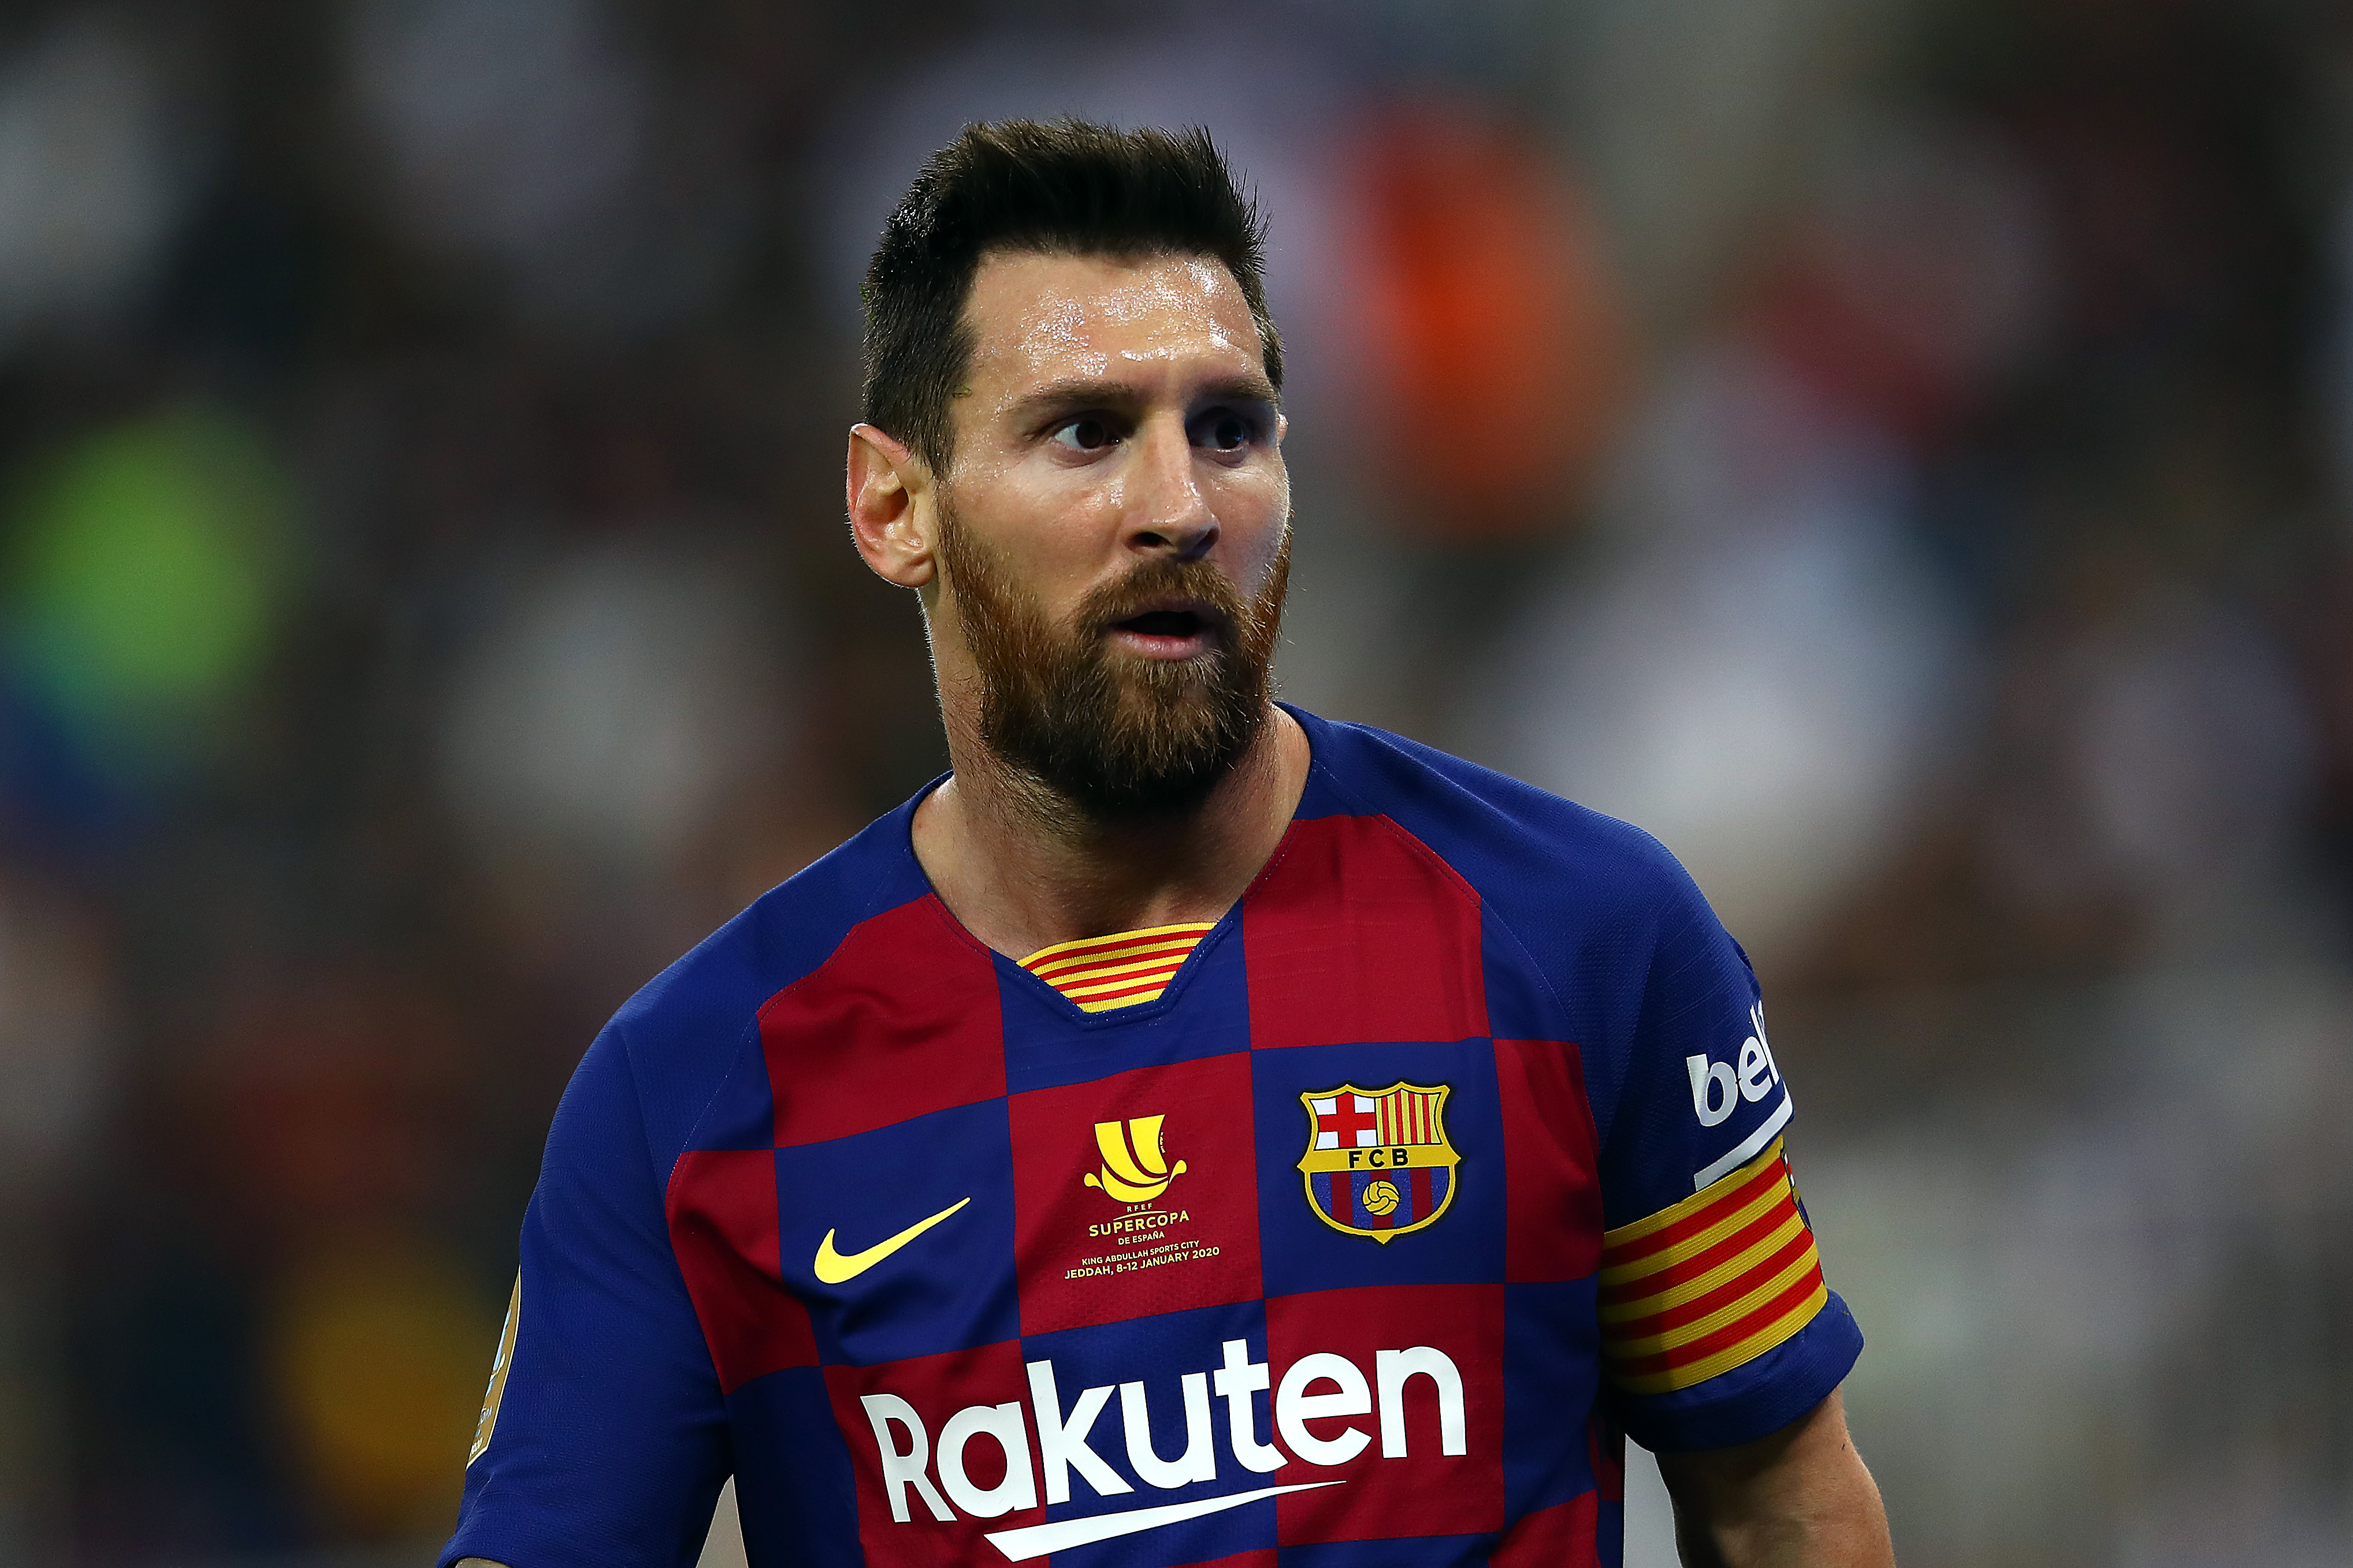 Barcelona will look up to Messi as they look to return to winning ways (Photo by Francois Nel/Getty Images)